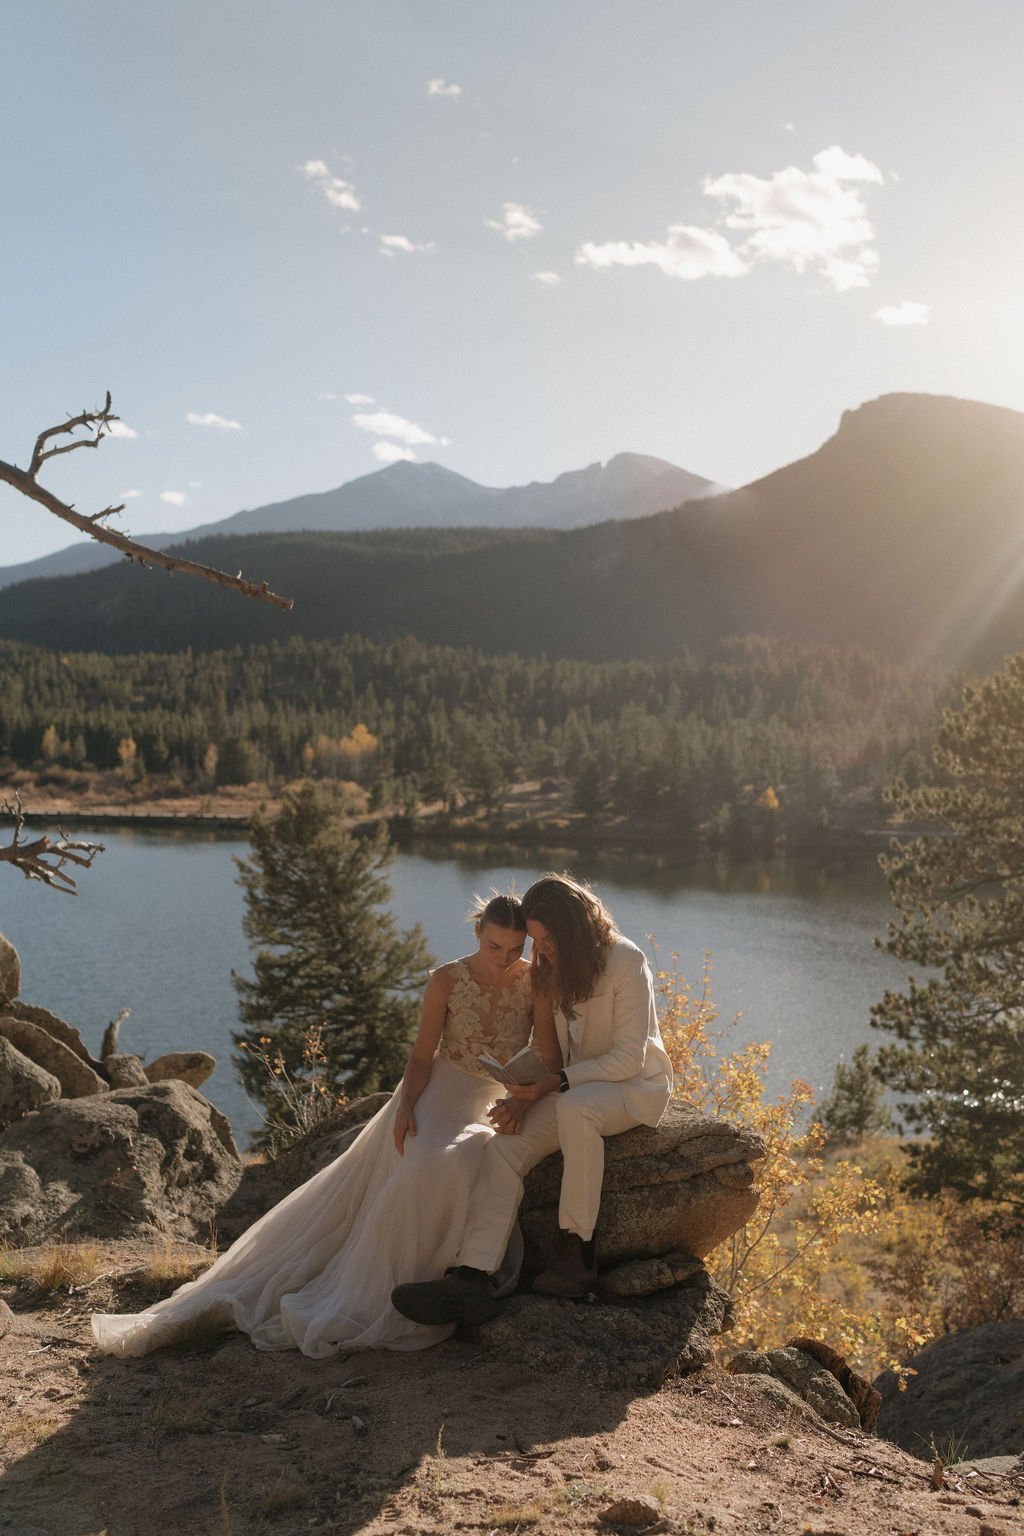 The Best Wedding Dress for Hiking Elopements